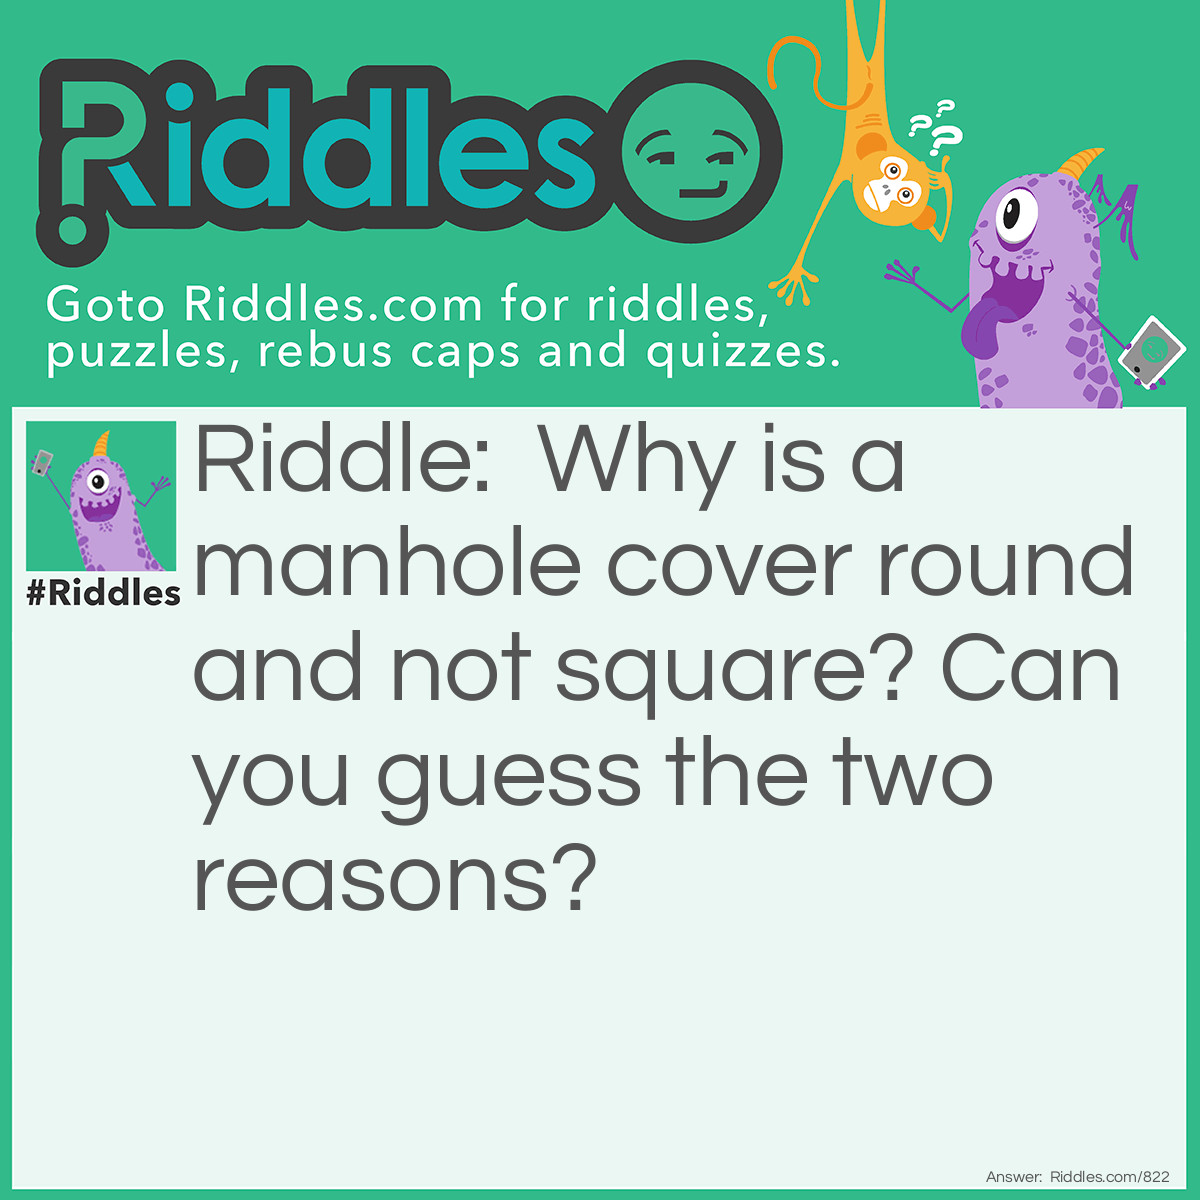 Riddle: Why is a manhole cover round and not square? Can you guess the two reasons? Answer: 1: It can't fall through the hole like a square one could. 2: It can easily be moved by rolling.